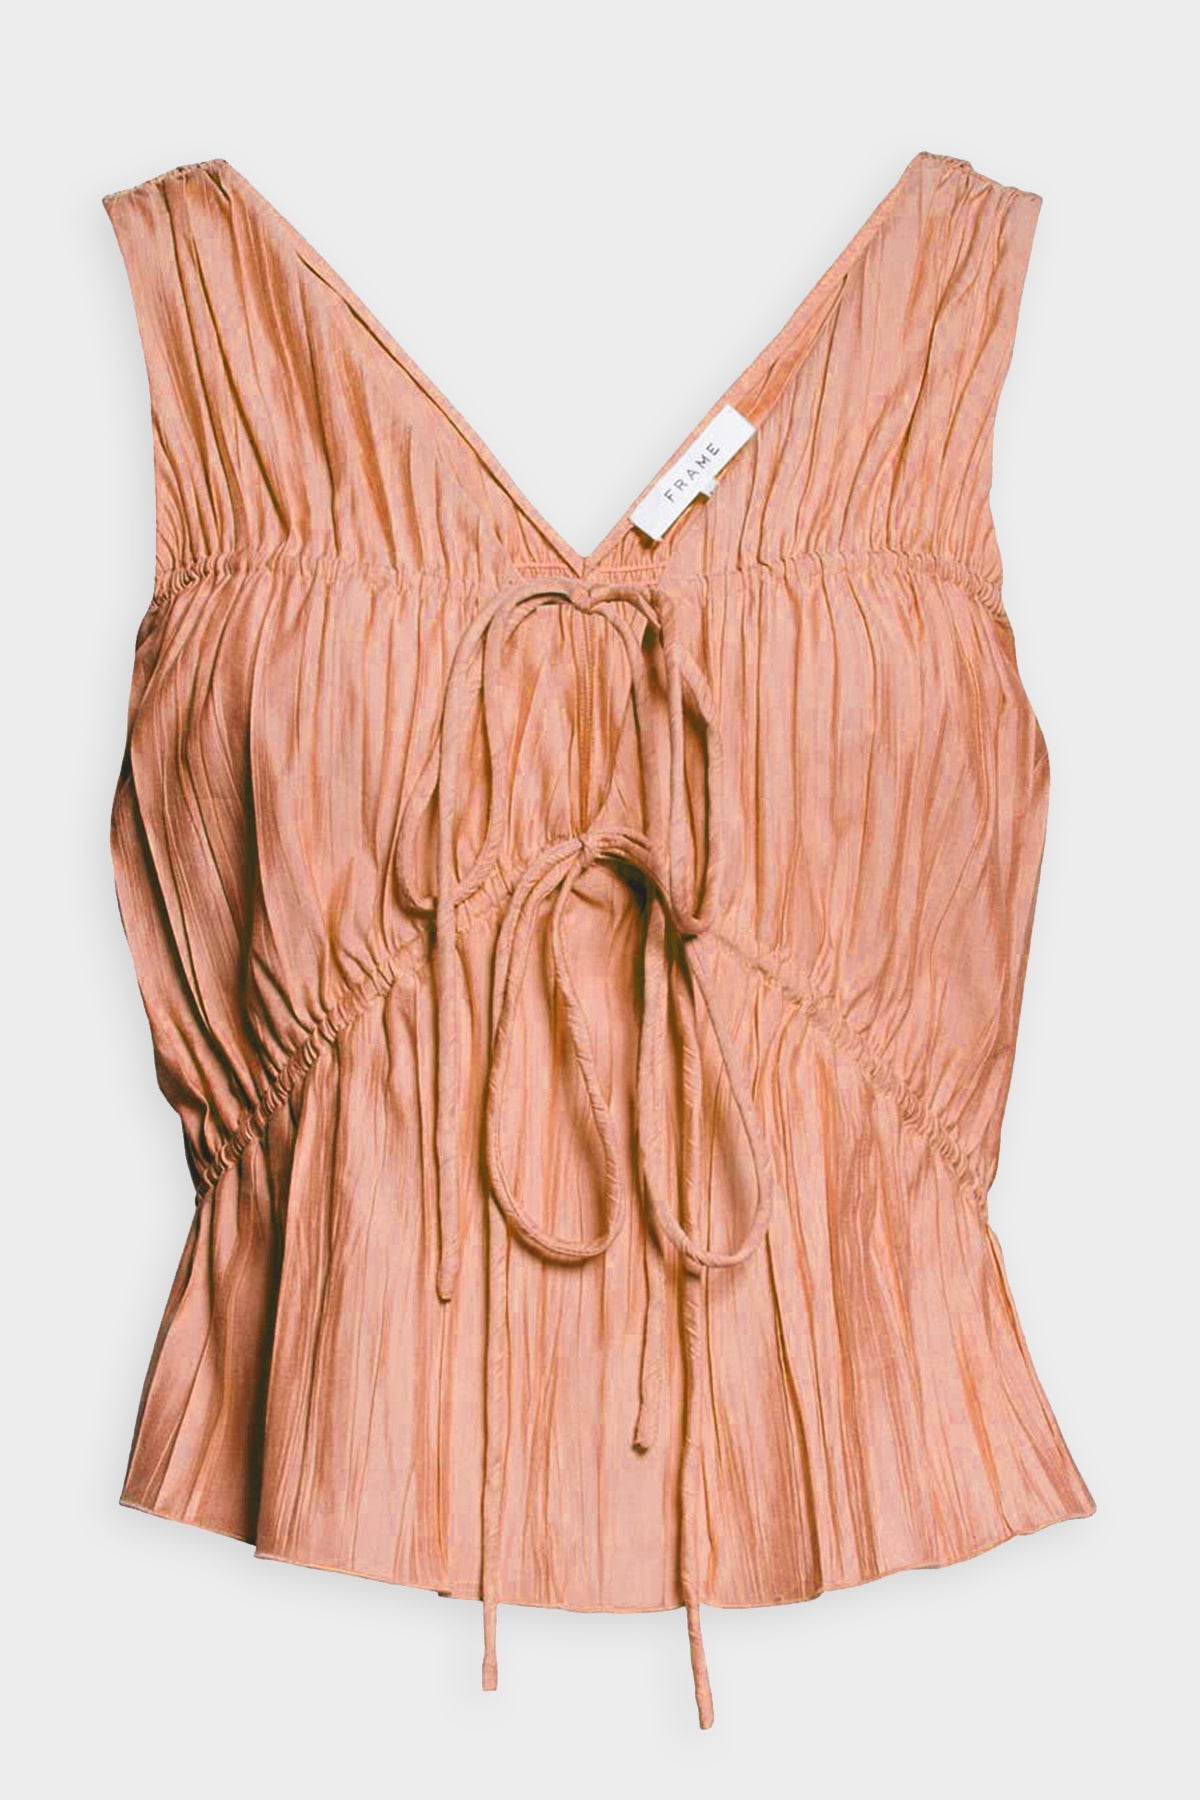 Cinched Crinkle Tank Top in Terracotta - shop-olivia.com